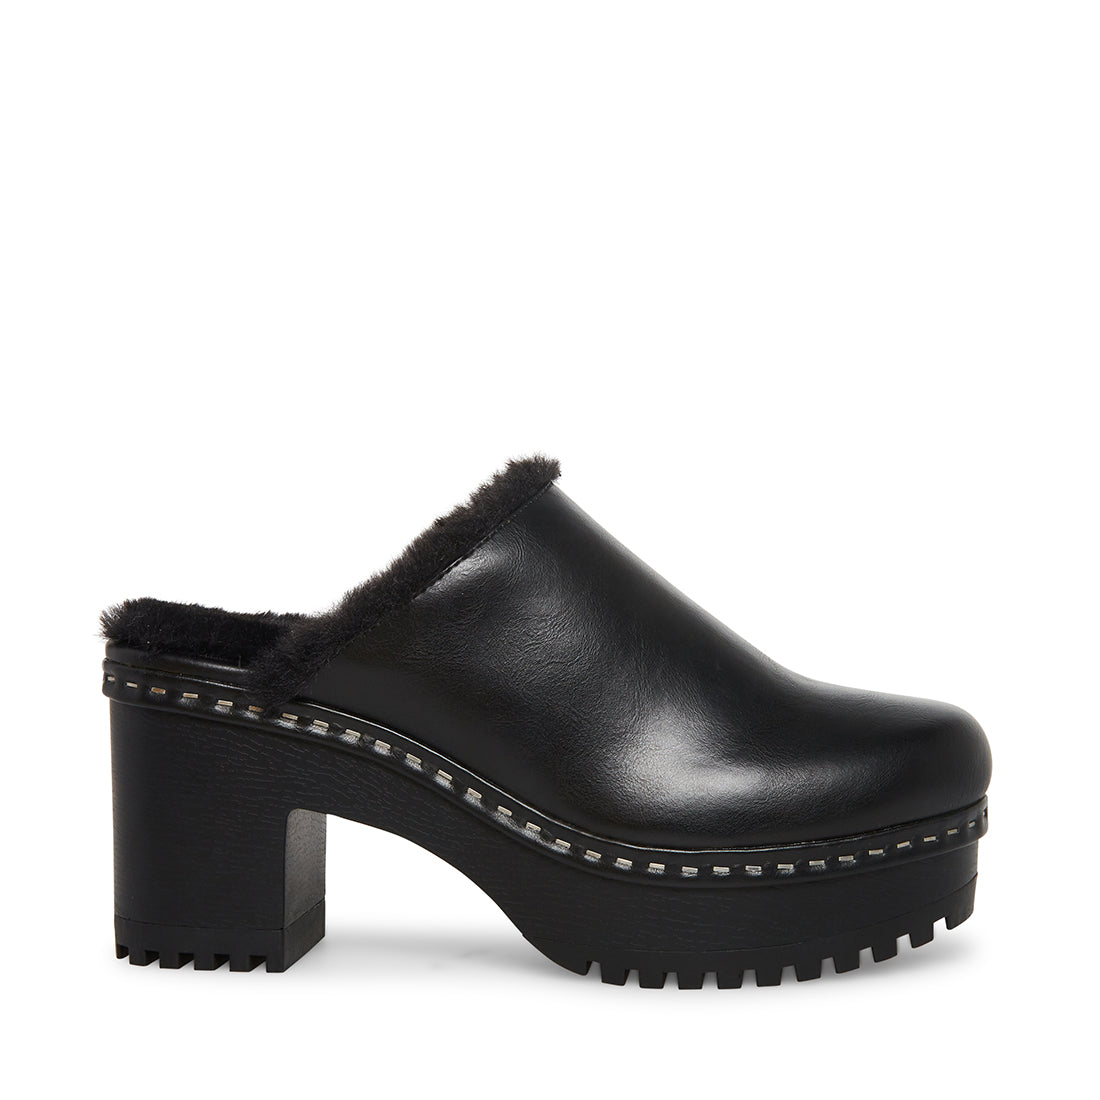 QUENTIN BLACK - SM REBOOTED – Steve Madden